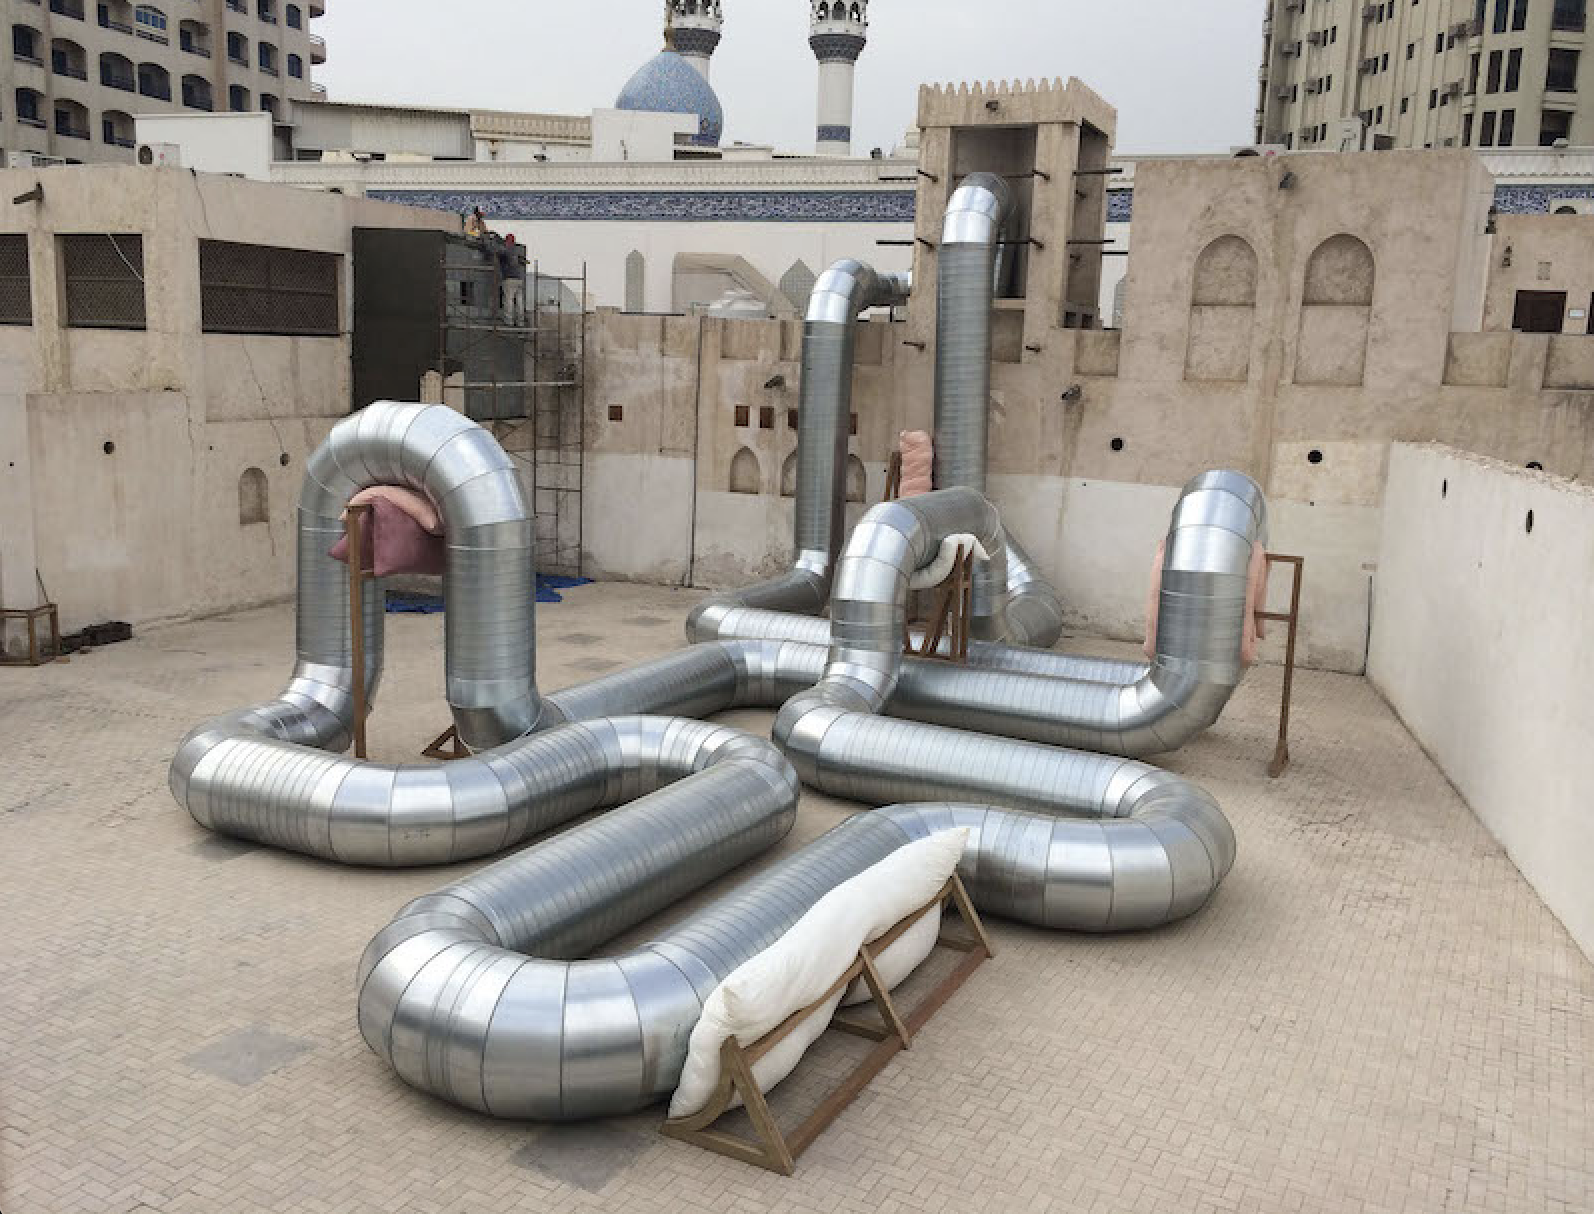 The Wick - Holly Hendry, ‘Homeostasis’, 2014. Galvanised steel ducting, meranti wood, cushions, fan, air.
Installed at Courtyard C, Sharjah Art Foundation, Sharjah, United Arab Emirates (2014). Copyright Holly Hendry. Courtesy the artist and Stephen Friedman Gallery, London and New York. 